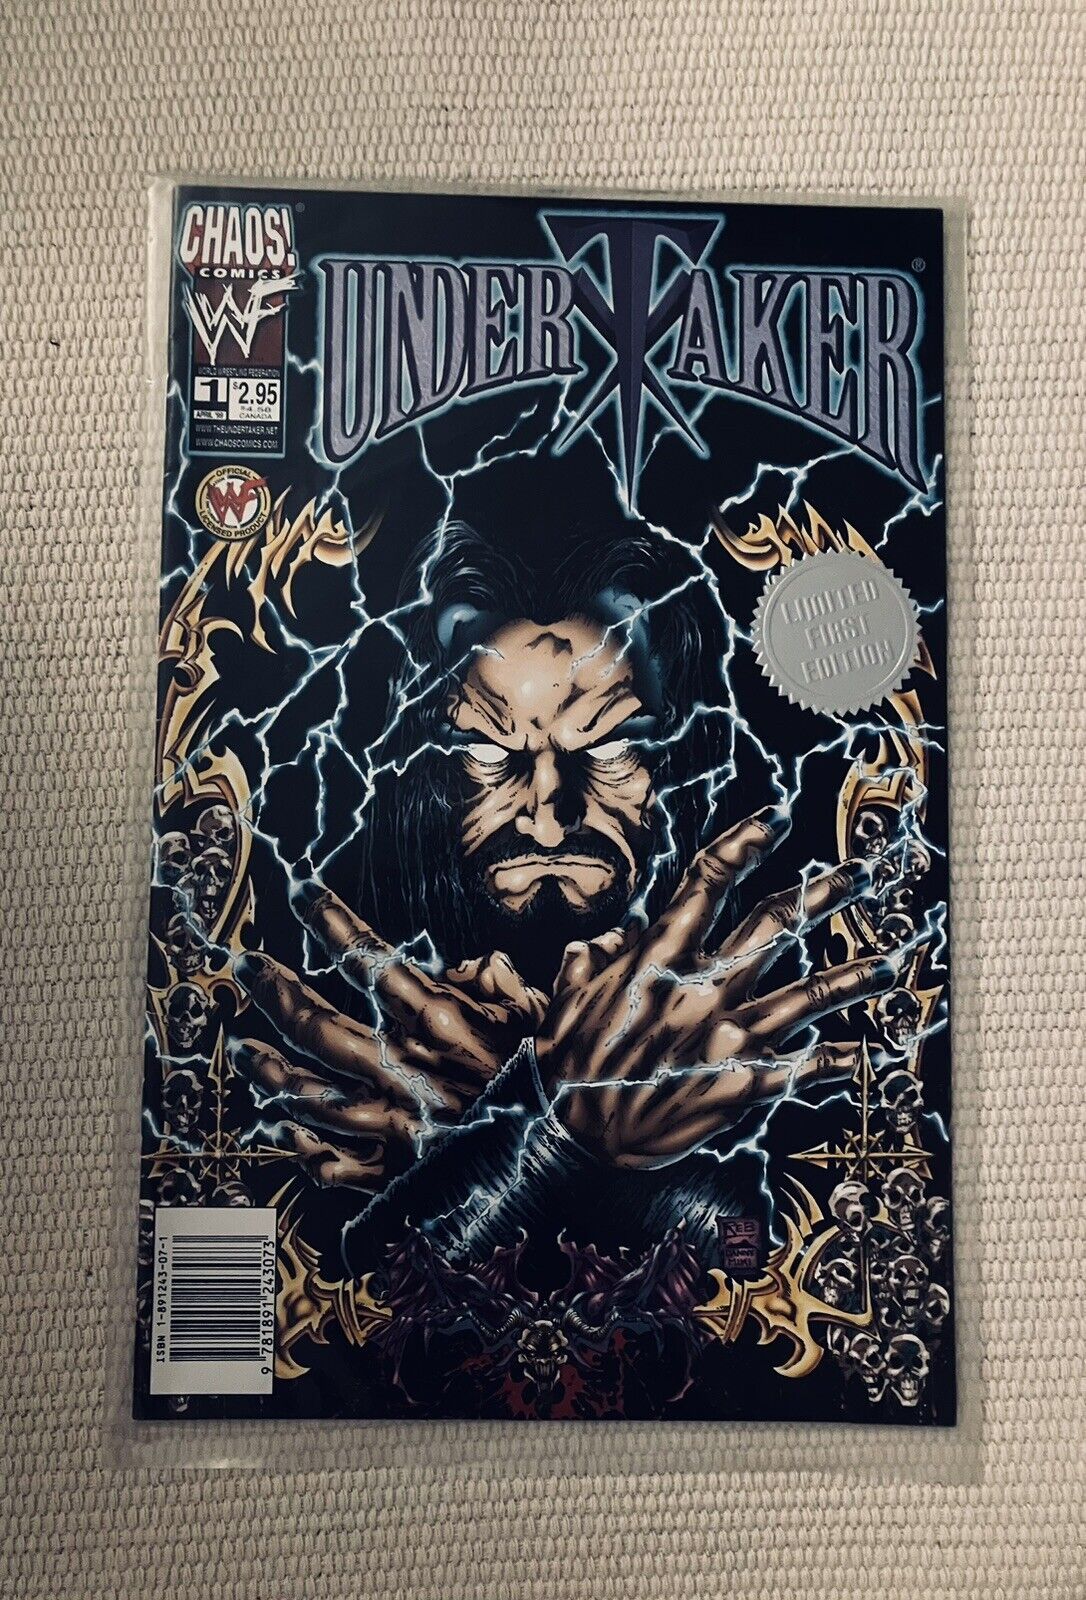 WWF Chaos Comics UNDERTAKER #1 Comic Book April 1999 Limited First Edition WWE